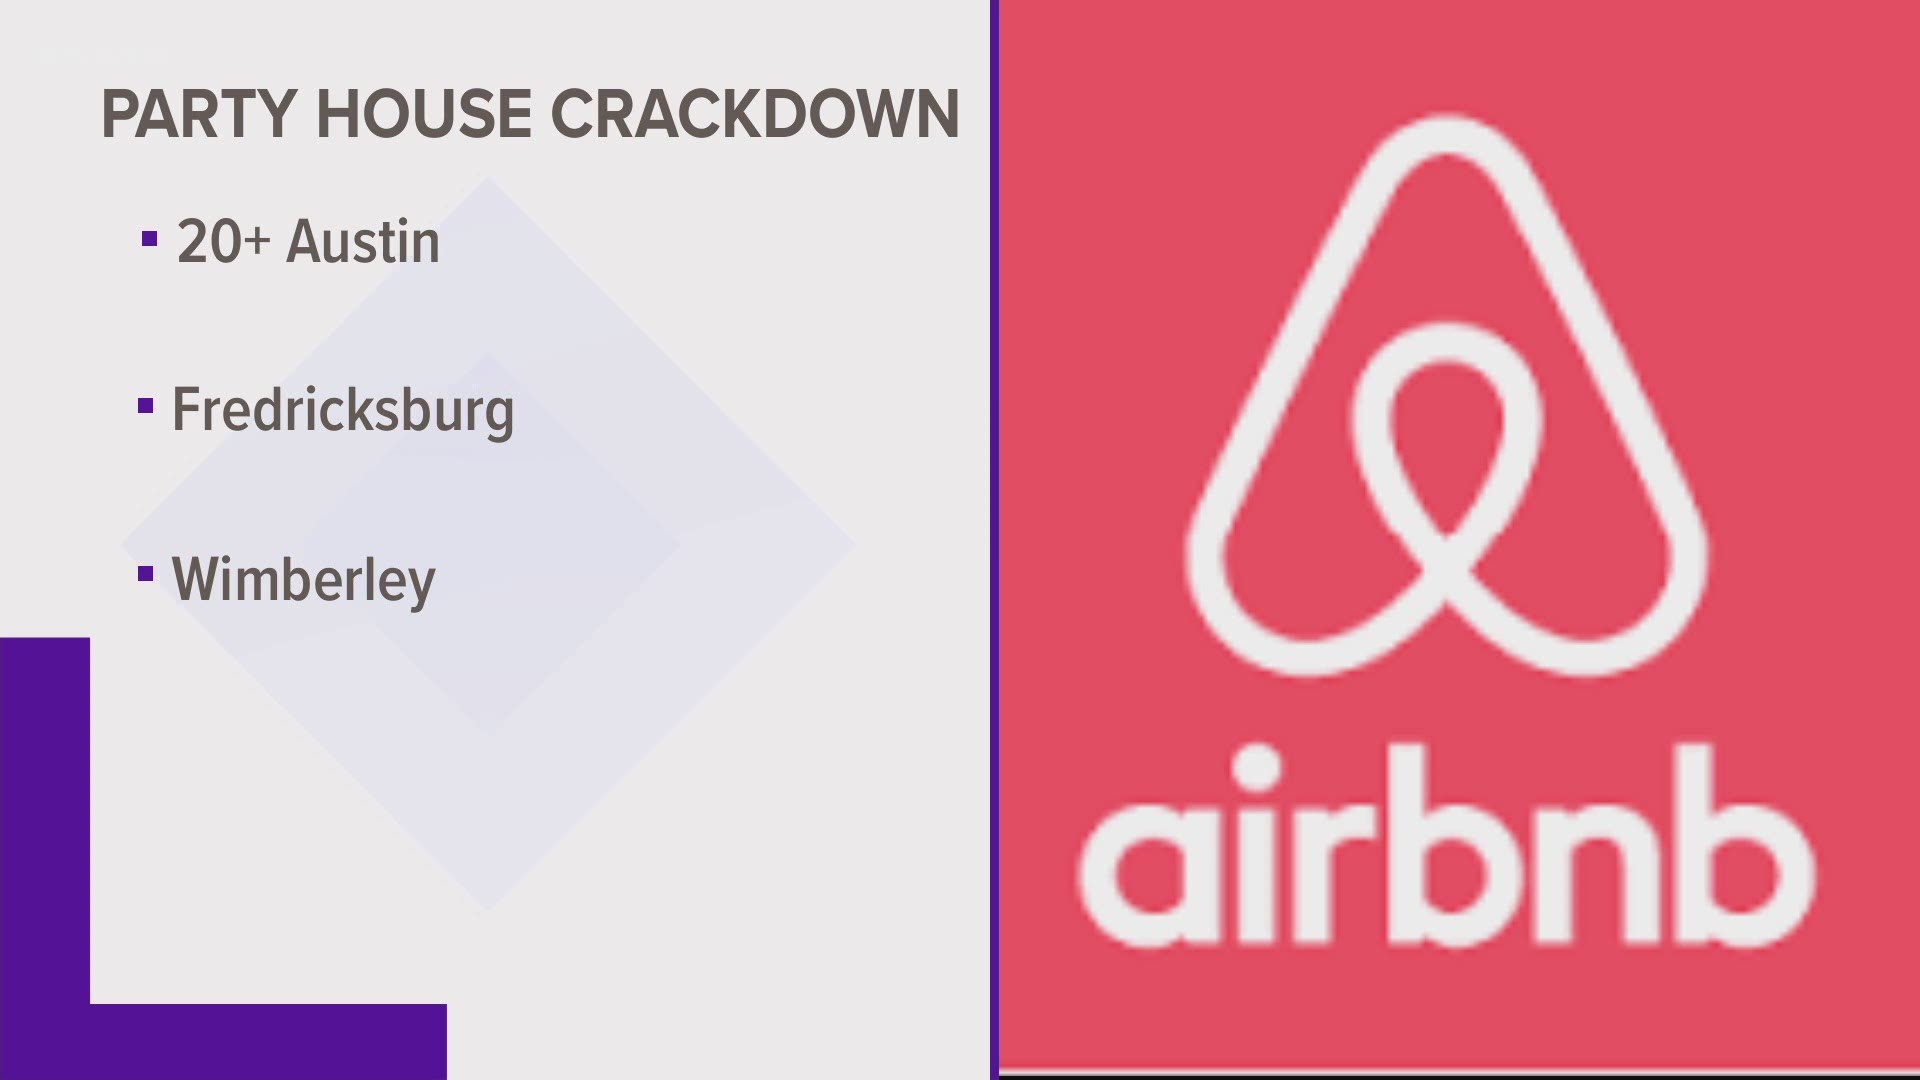 Airbnb is cracking down on party houses in Texas, including in Austin.